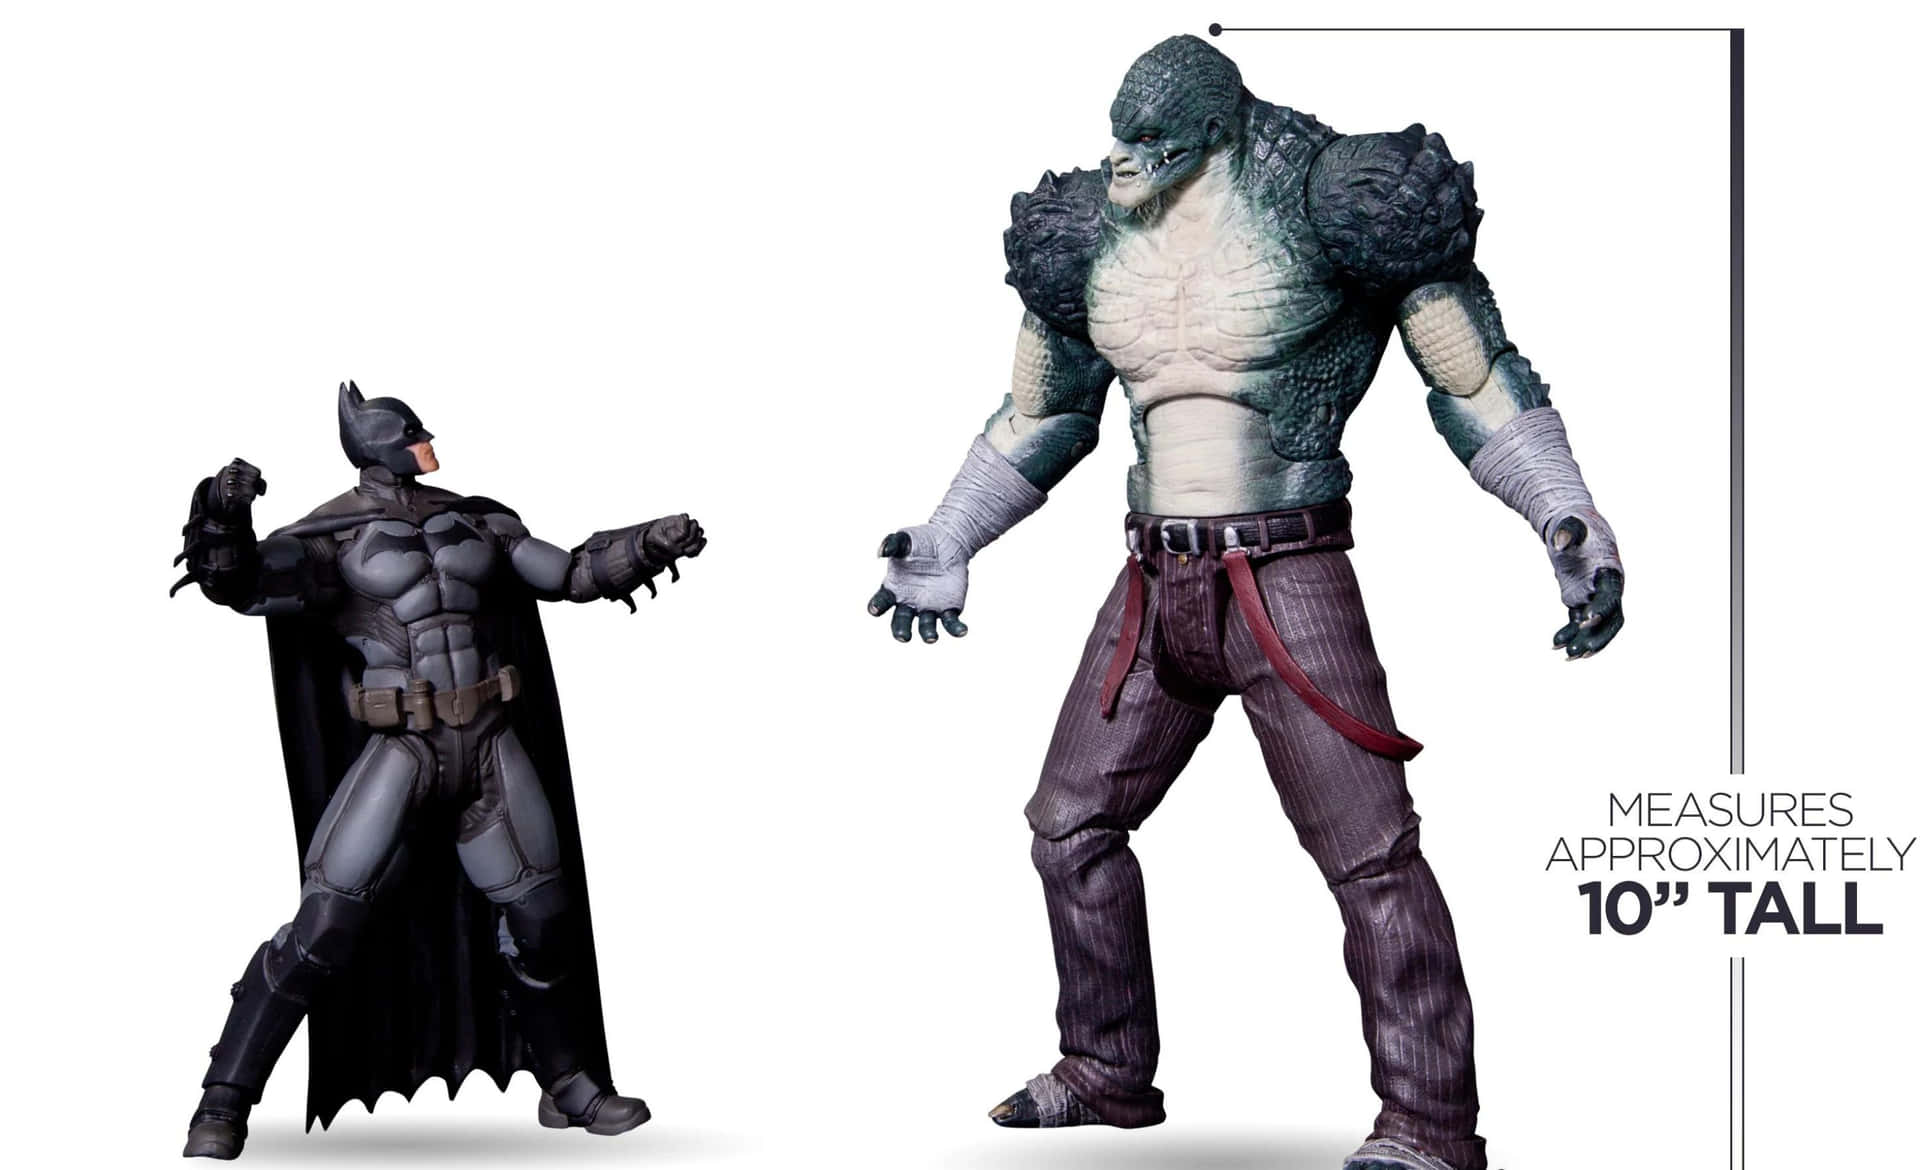 Killer Croc Unleashed - The Monstrous Man Reptile in Action Wallpaper